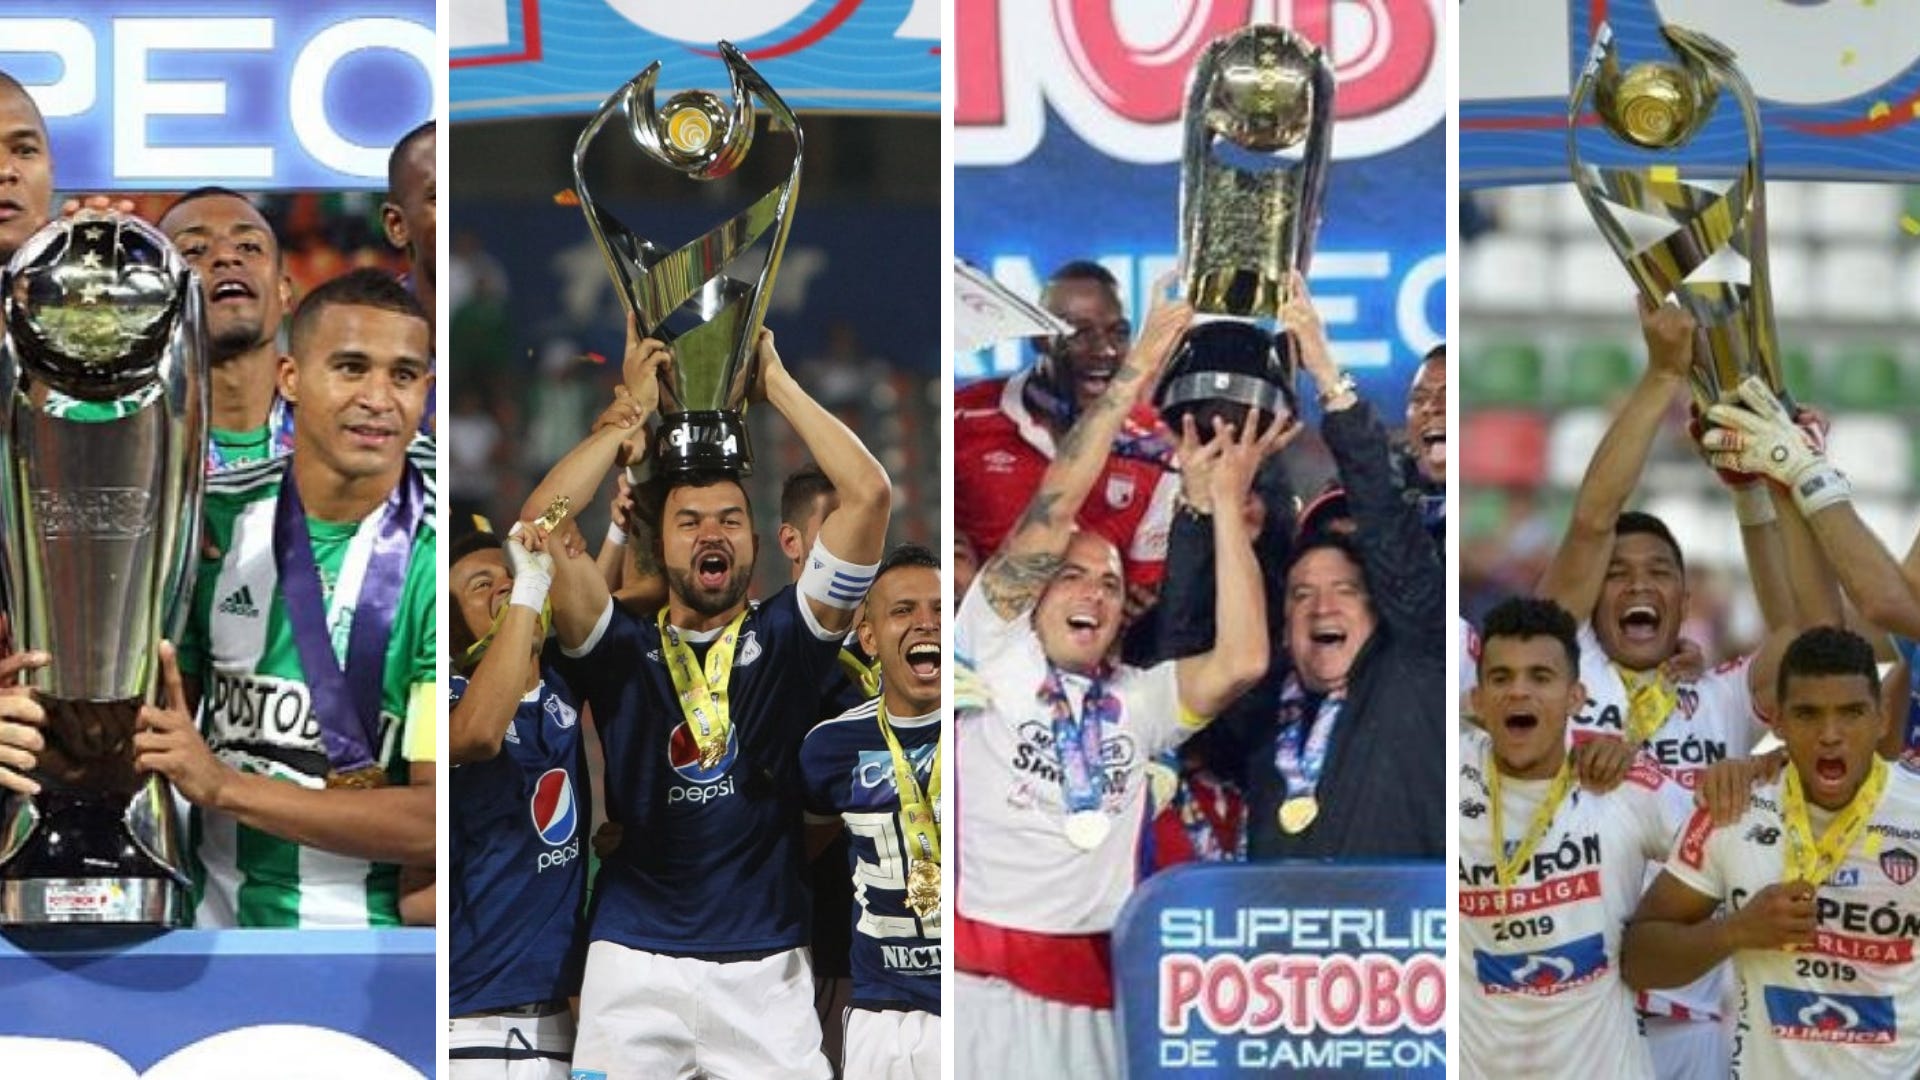 Champions of the Colombian Super League editions, finals and top